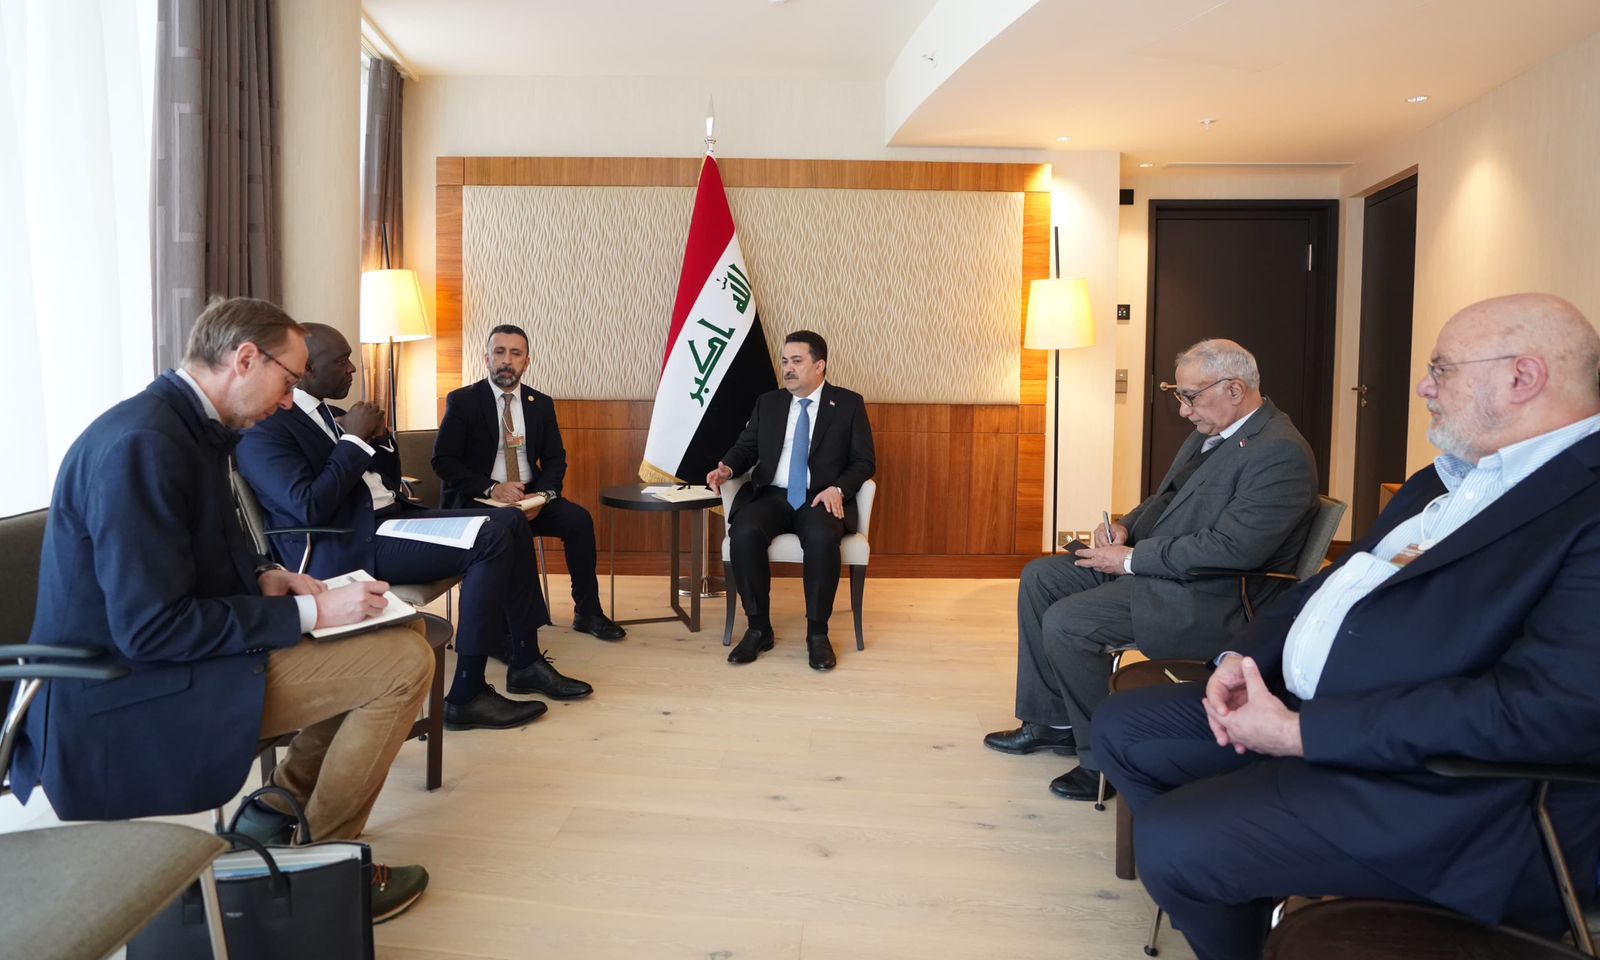 Iraqi Prime Minister and IFC Delegation discuss cooperation at Davos Forum